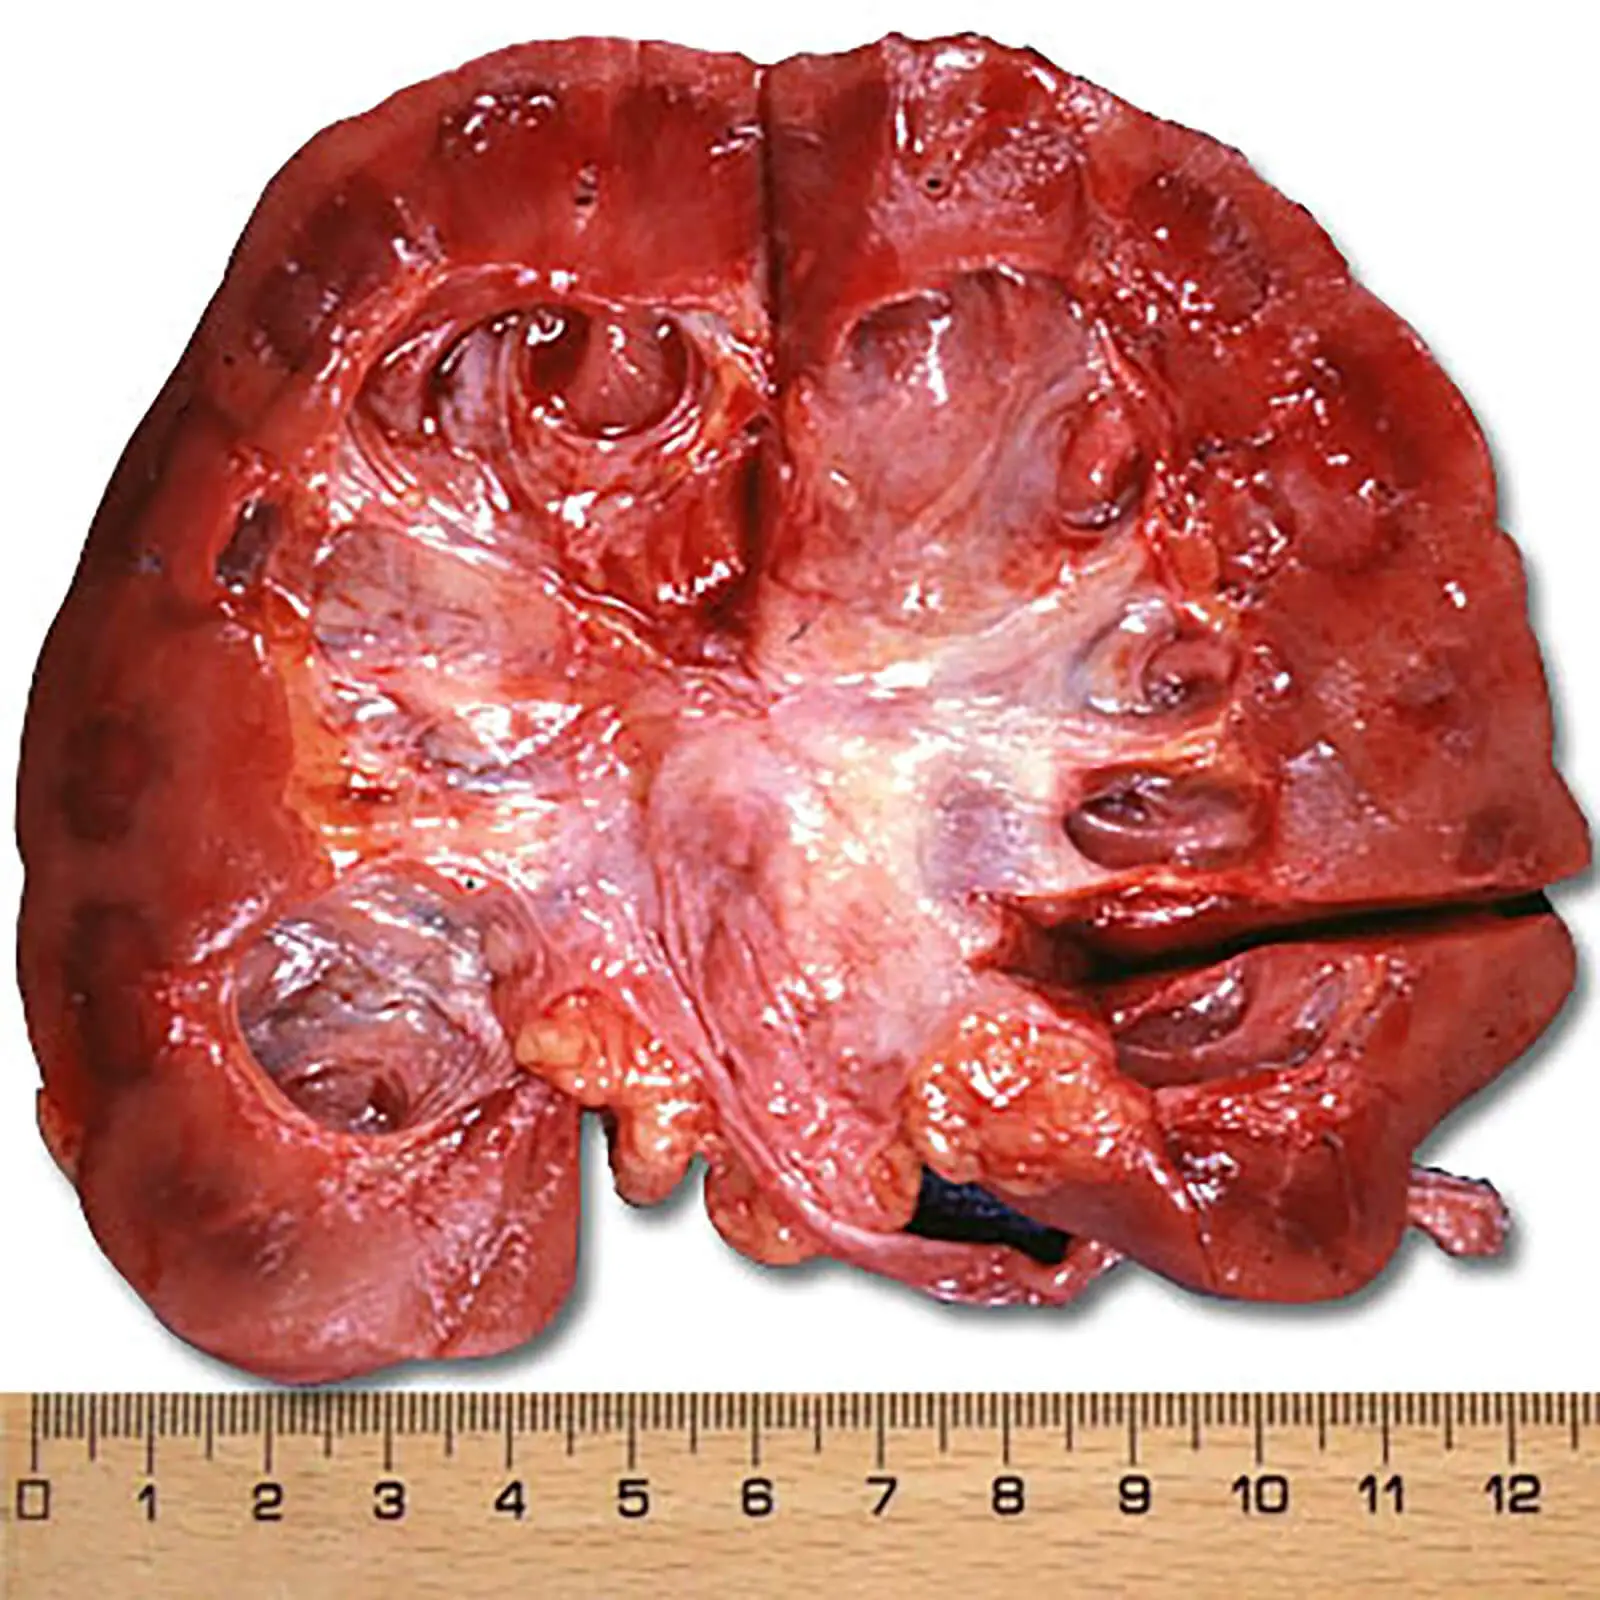 Cancer In A Kidney